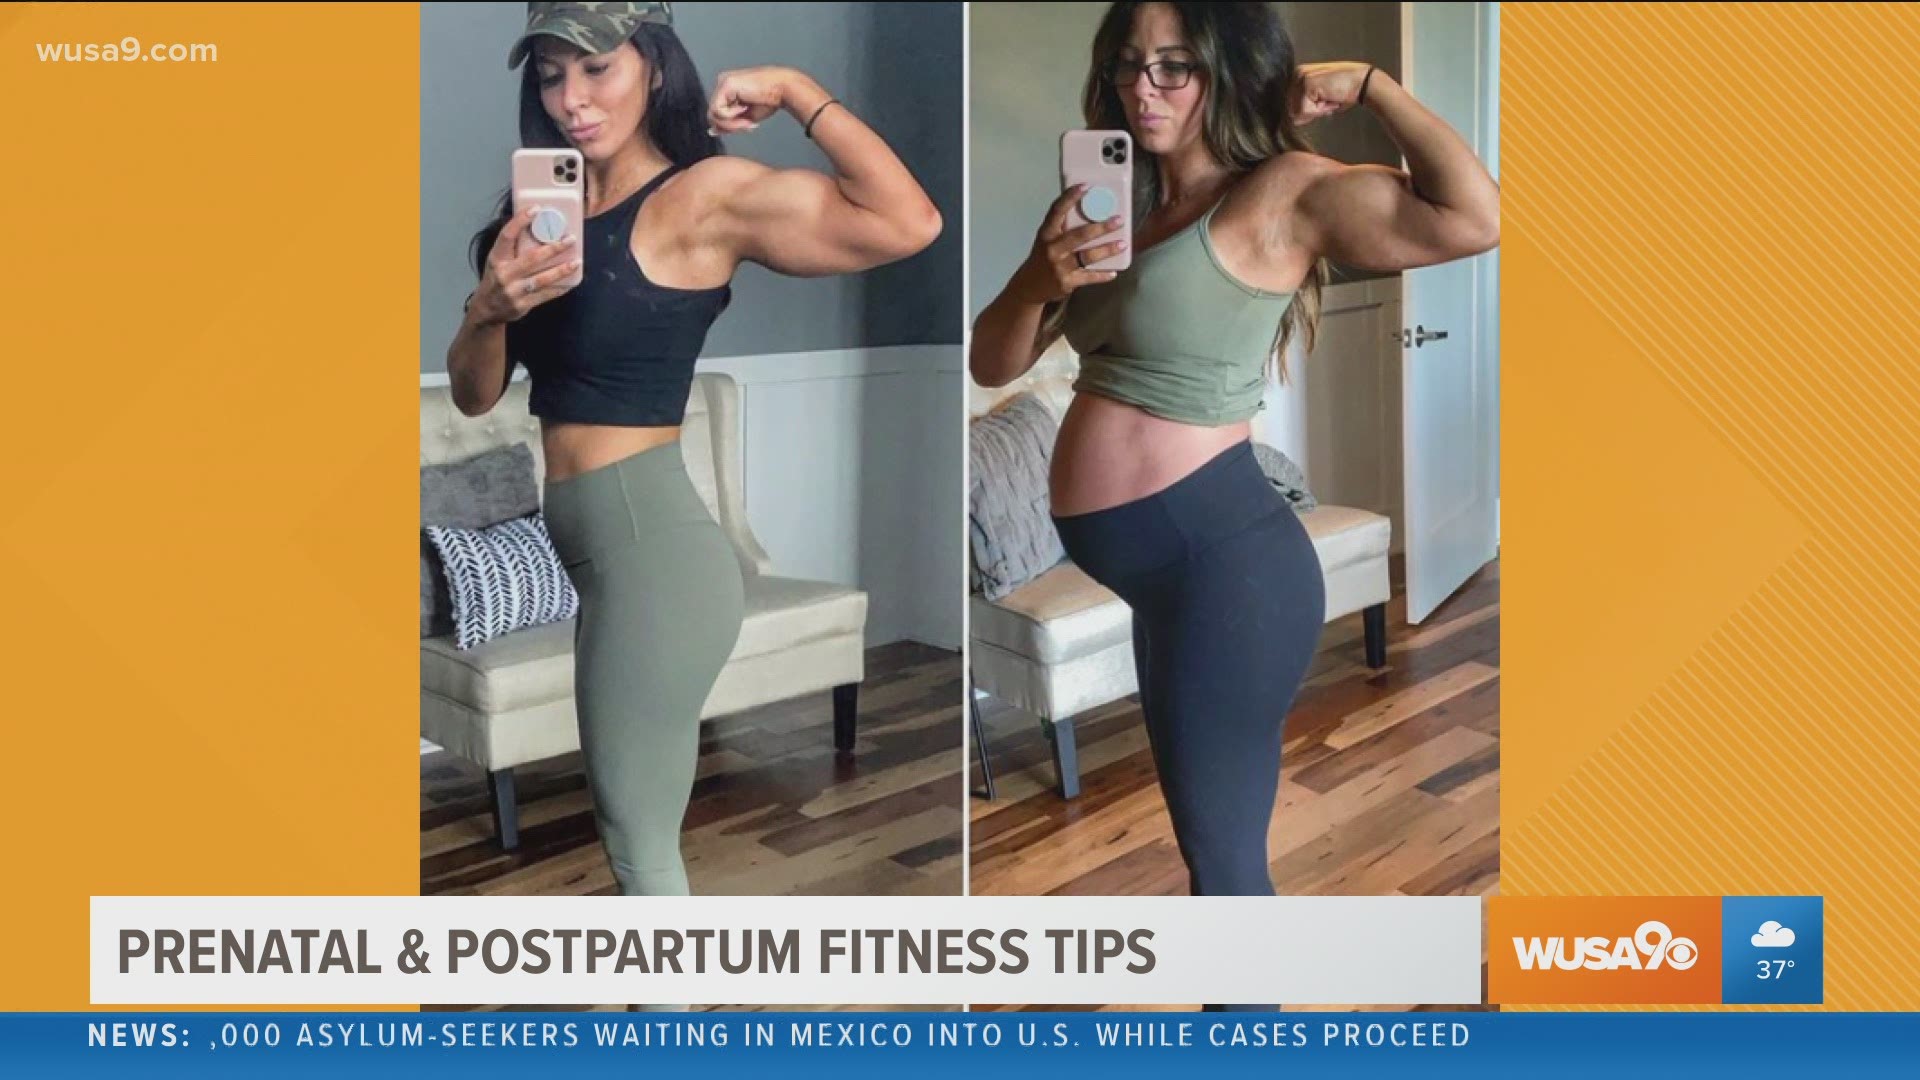 Certified personal trainer, Sarah Bowmar, shares the do's and don'ts of fitness for expecting and new moms.